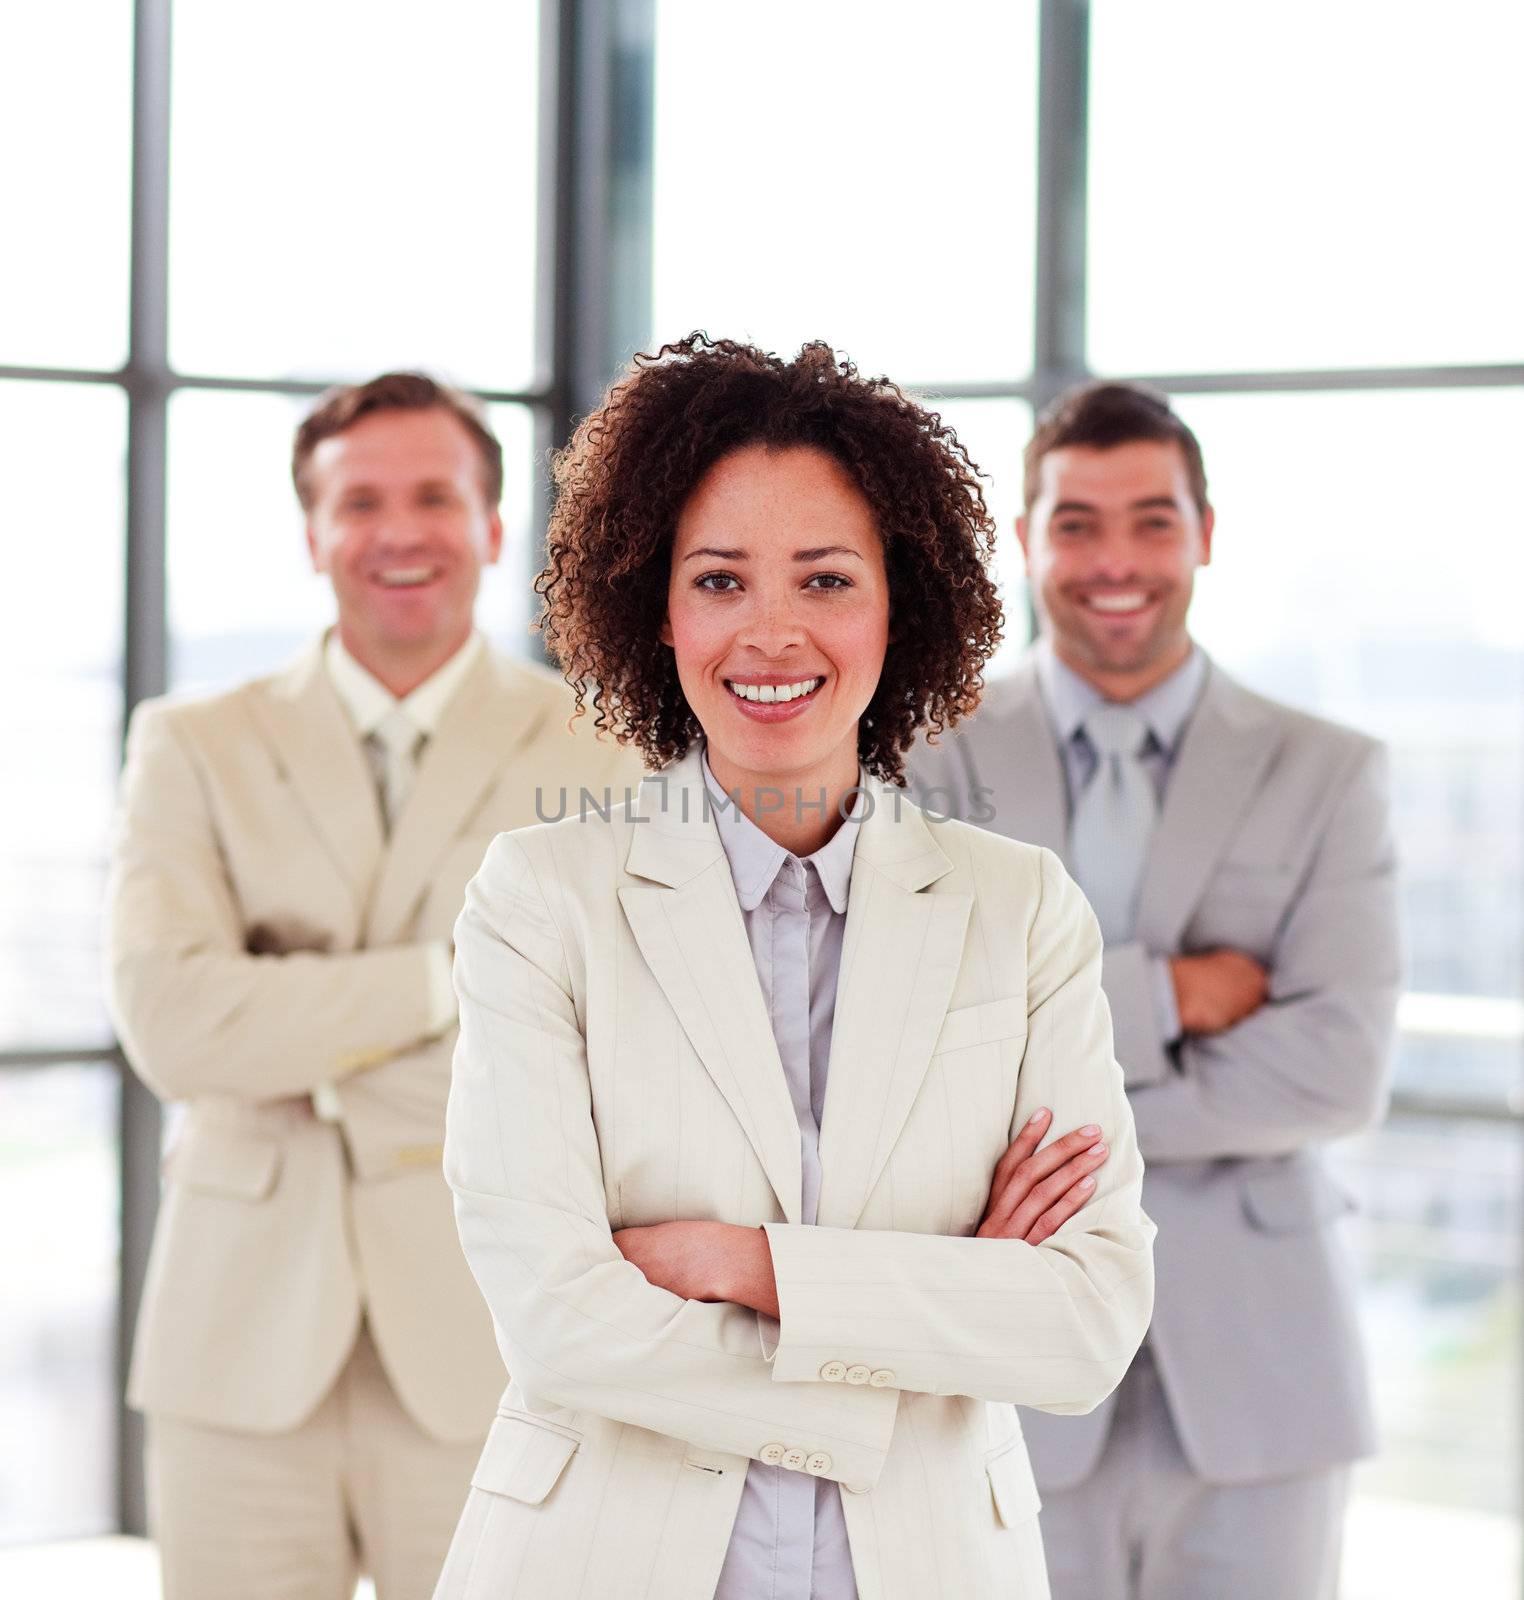 Smiling businesswoman with her team in the background by Wavebreakmedia